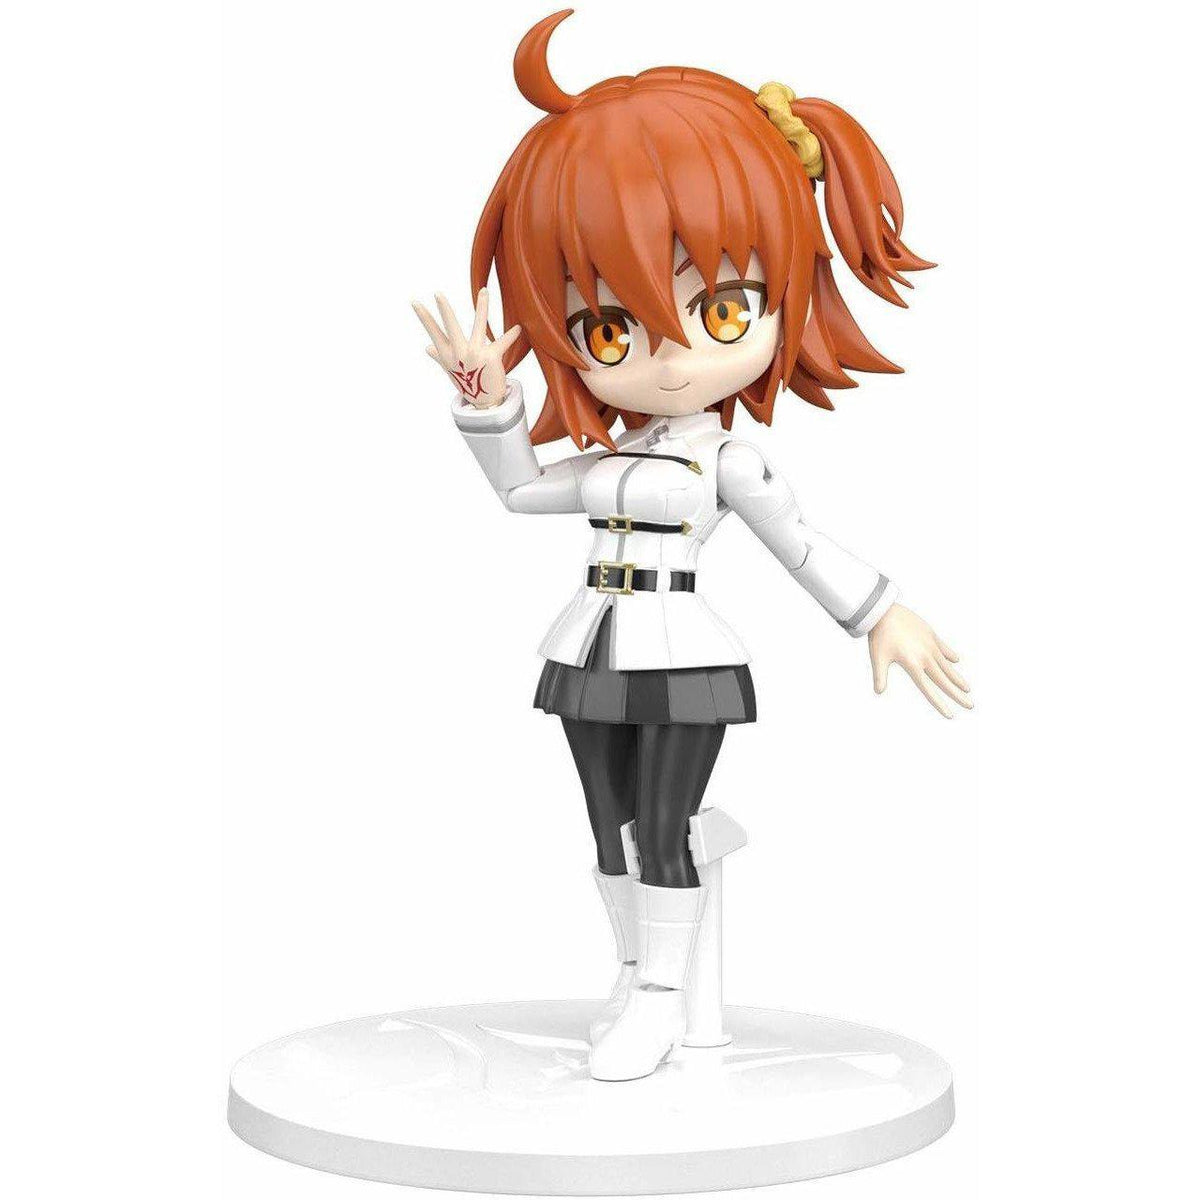 Fate Grand Order Plastic Model Kit Petitrits 04 Master/Female Protagonist-Bandai-Ace Cards &amp; Collectibles